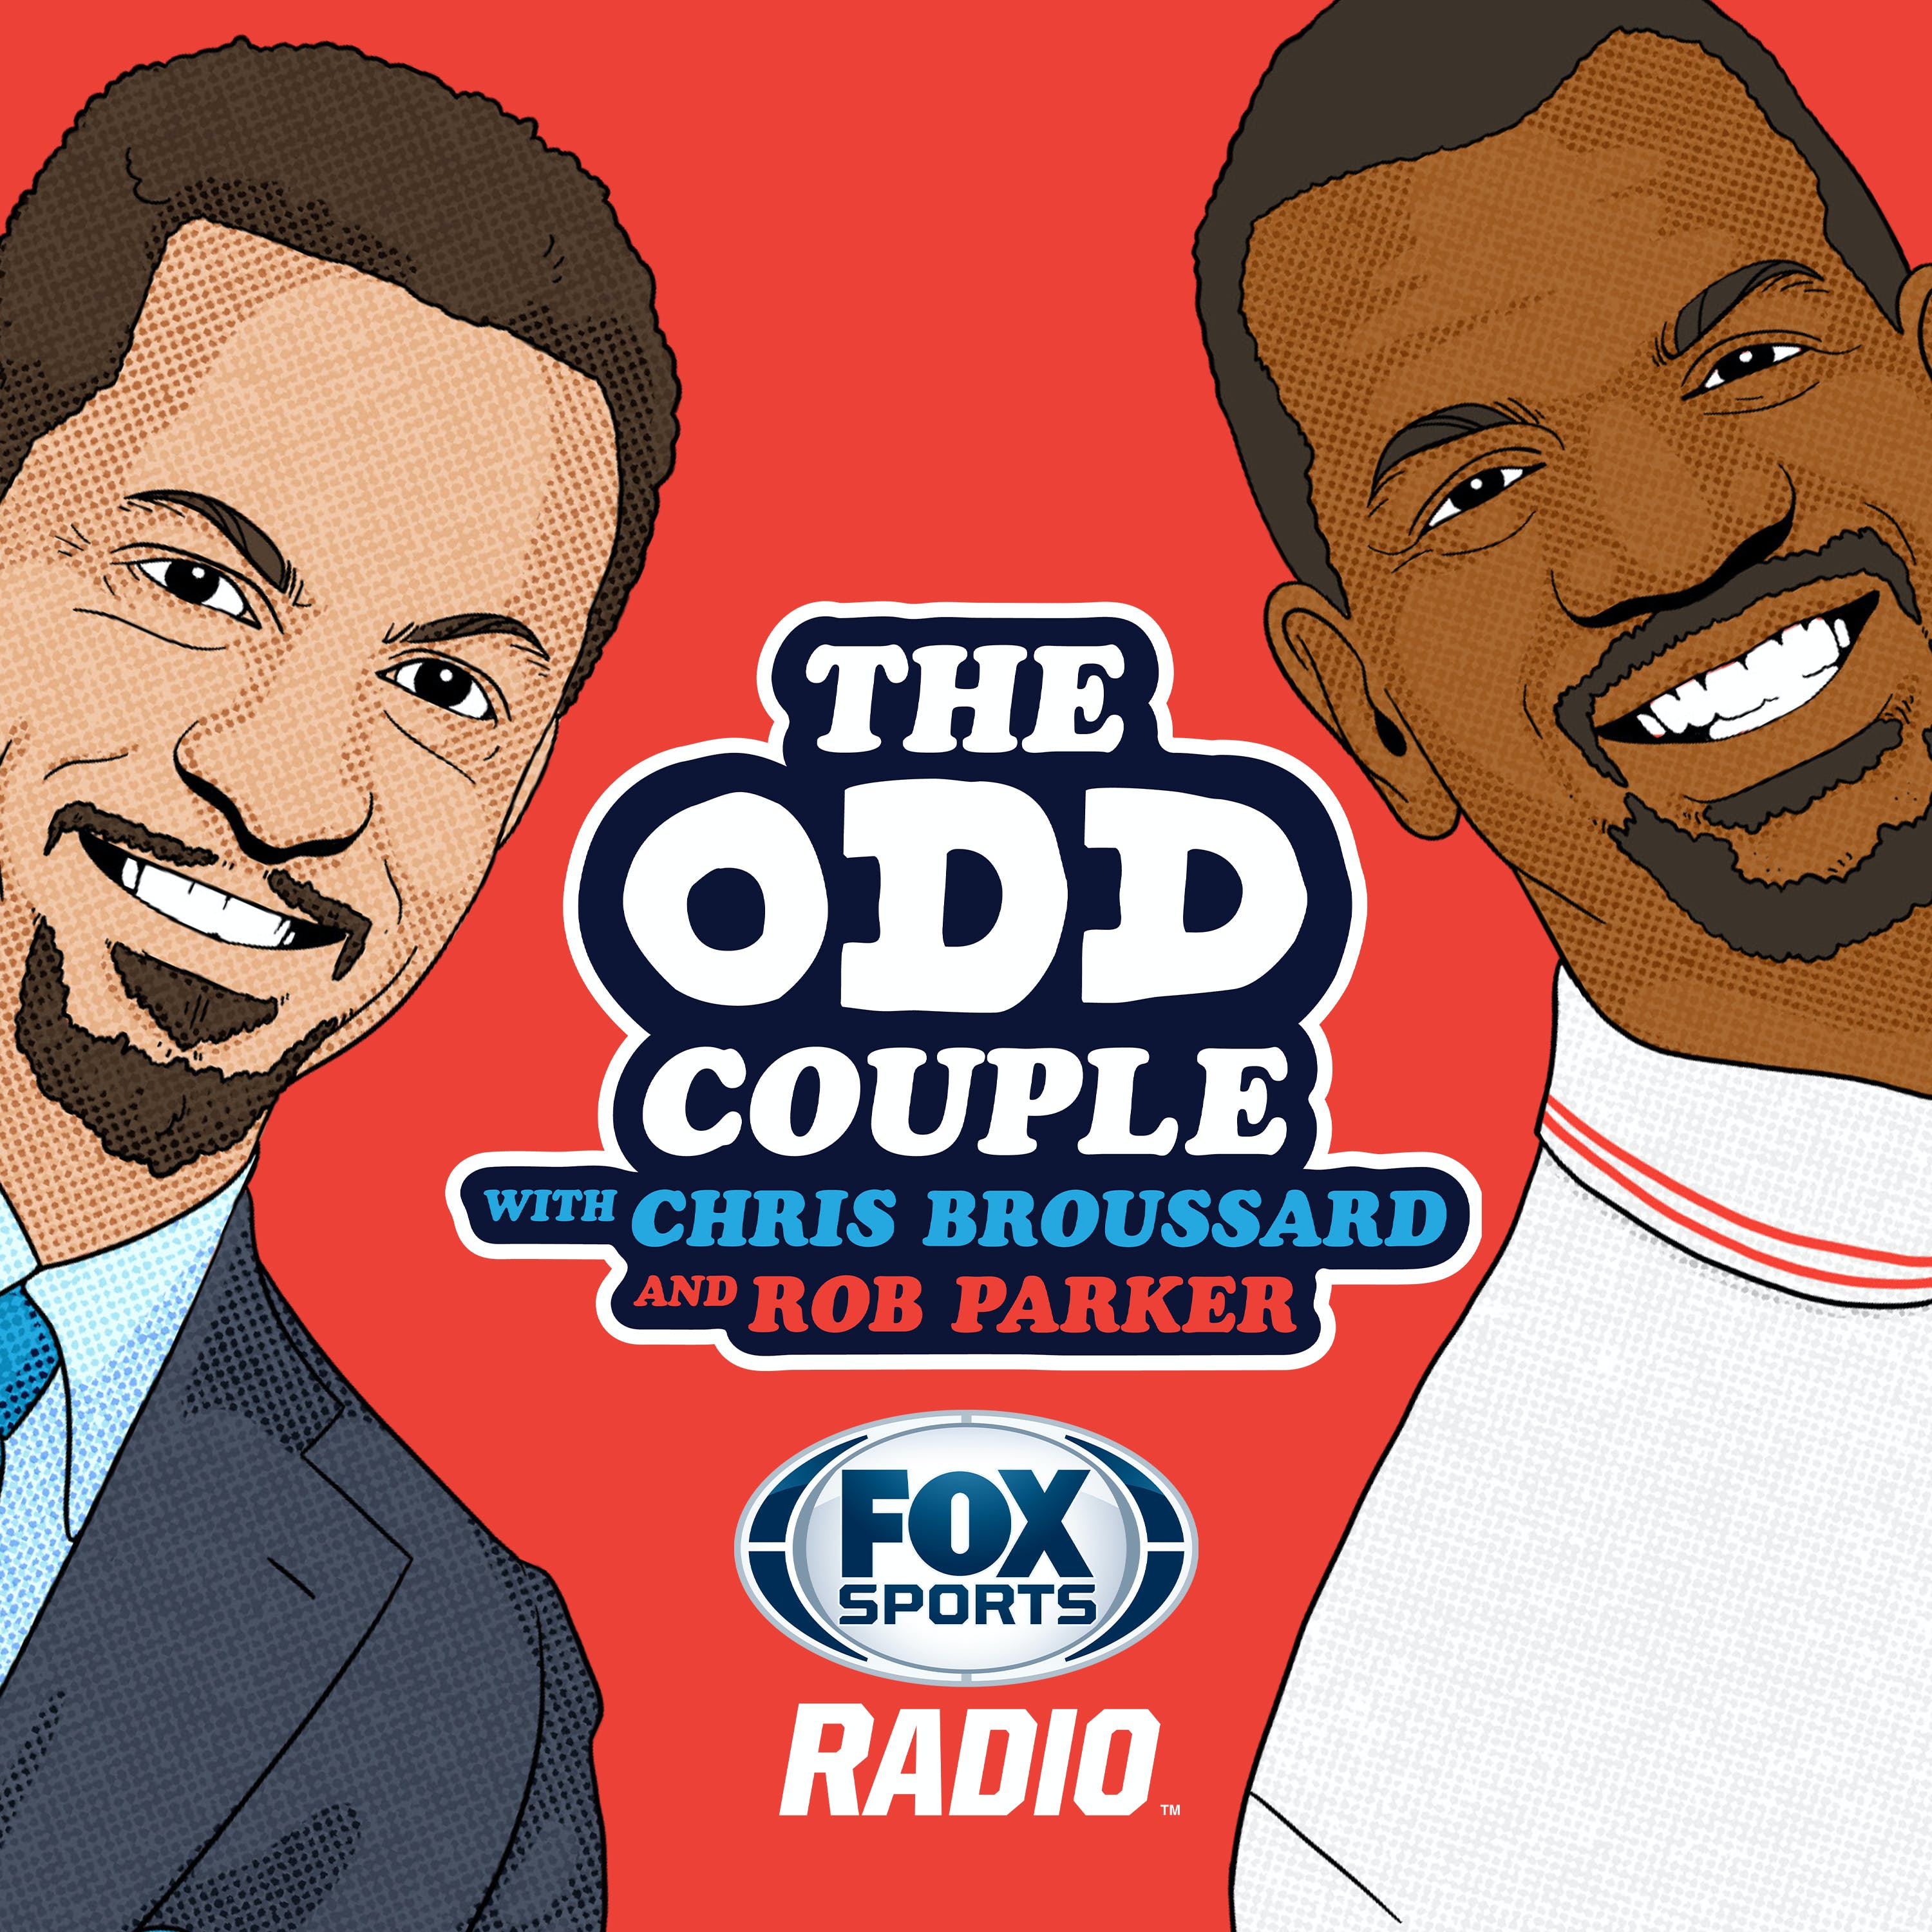 01/20/2022 - Best of The Odd Couple